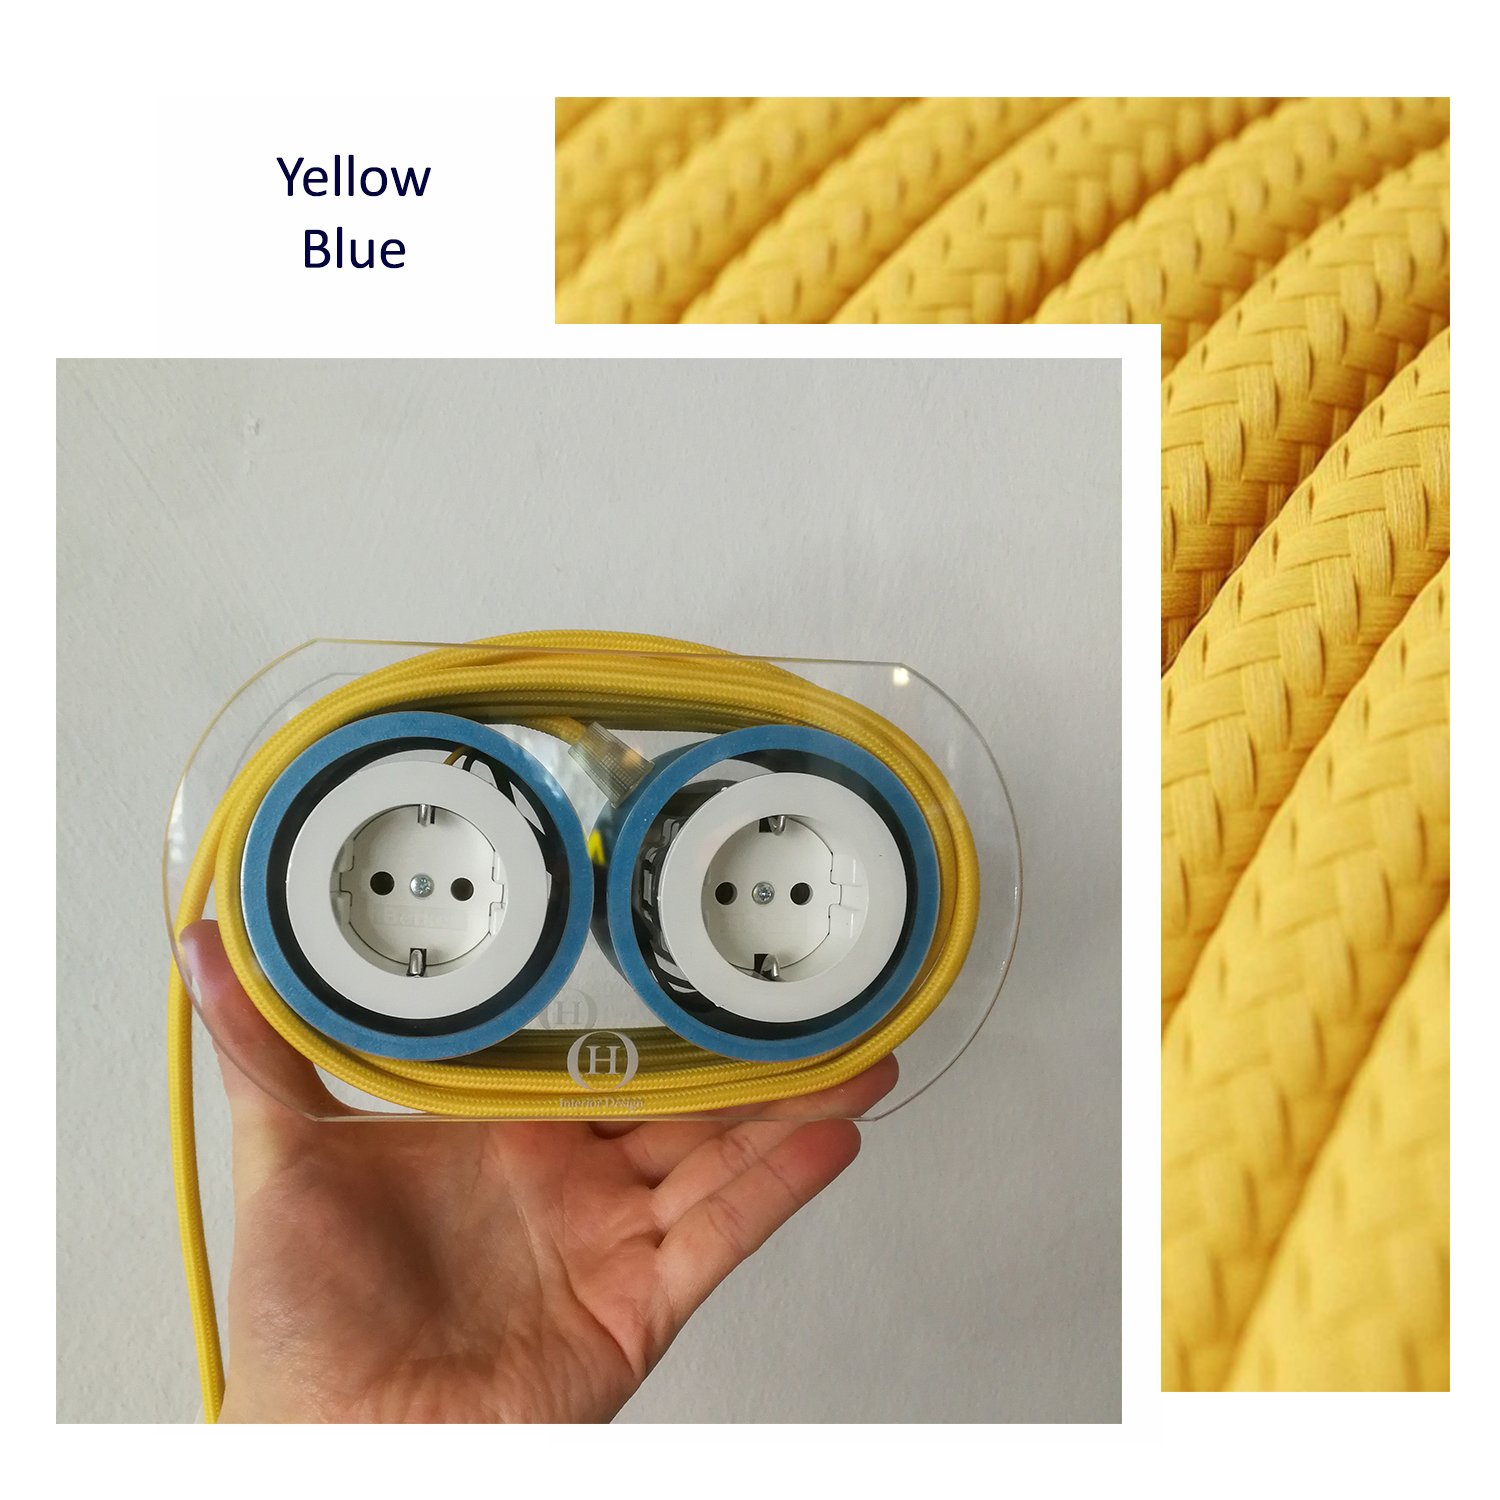 Extension Cord for 4 Plugs_Yellow & blue tubes.jpg